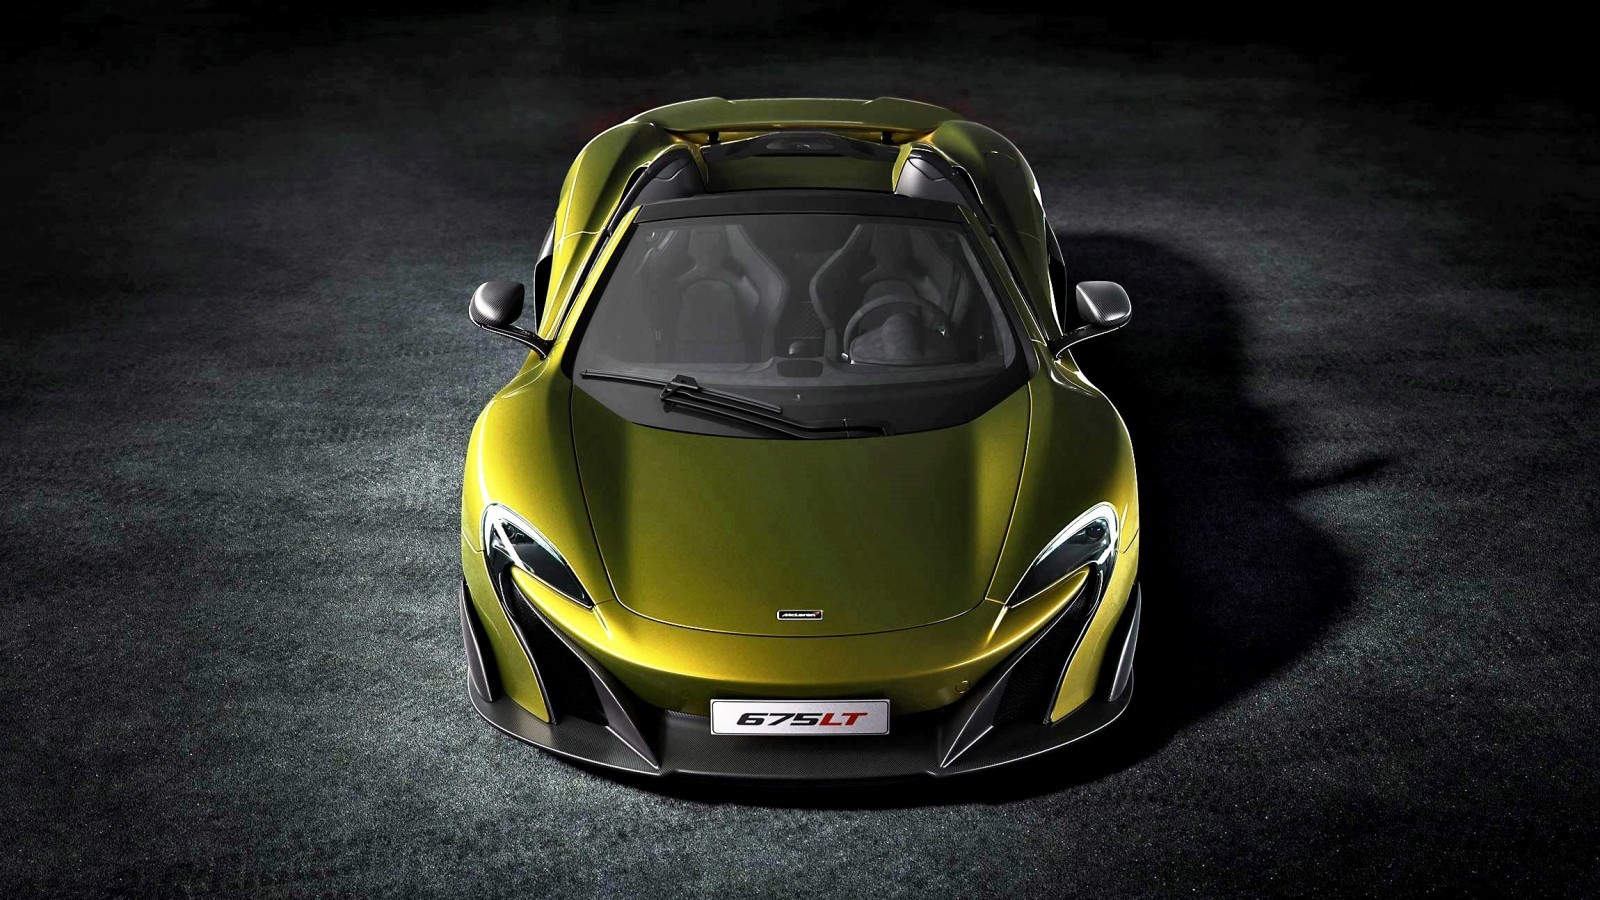 16 Mclaren 675lt Spider Reveal Hot Special Is Already Sold Out Car Revs Daily Com